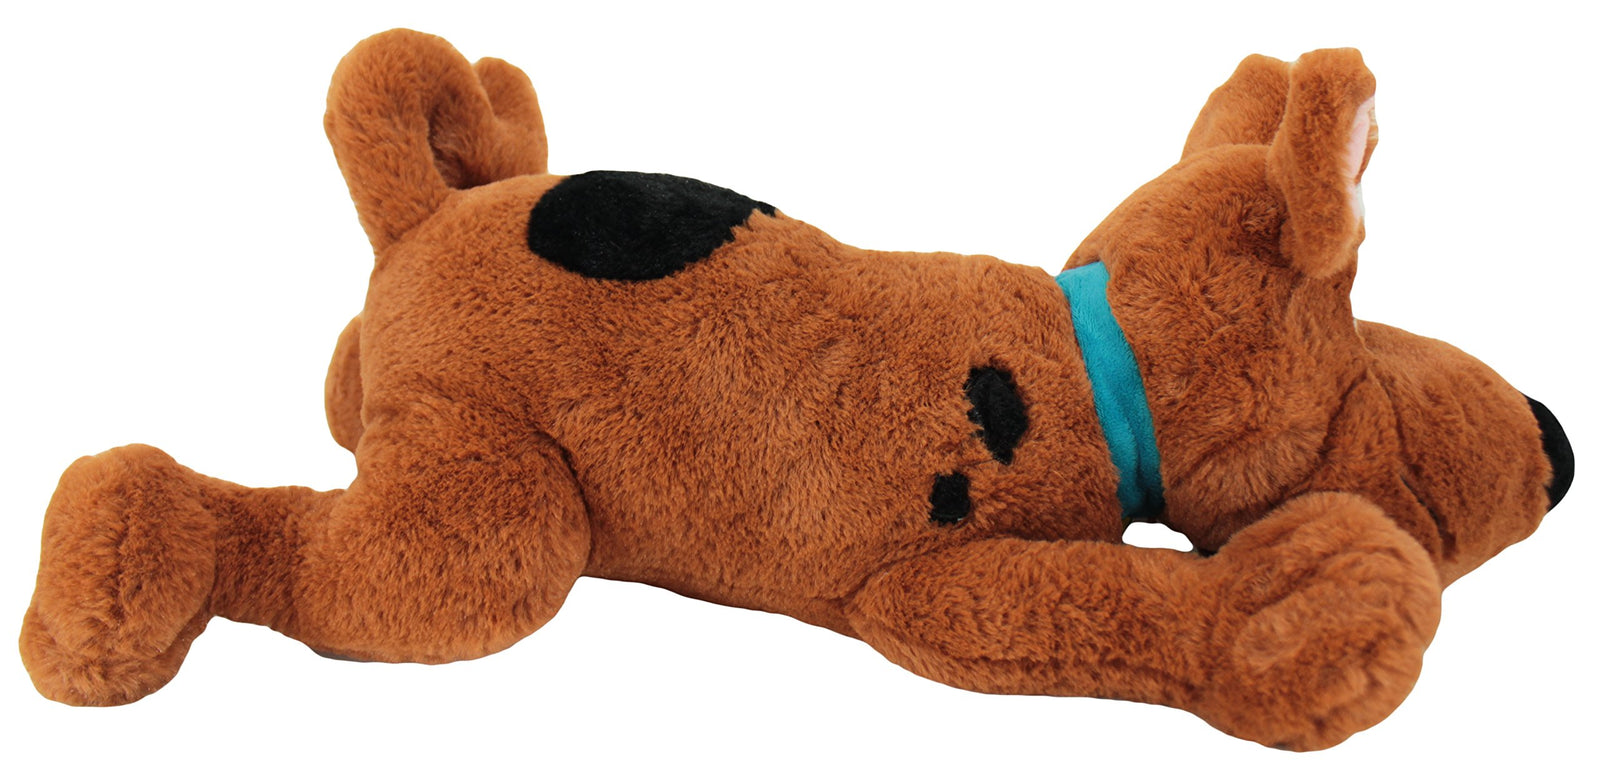 Animal Adventure | Scooby Doo | Collectible Seated Plush, Brown